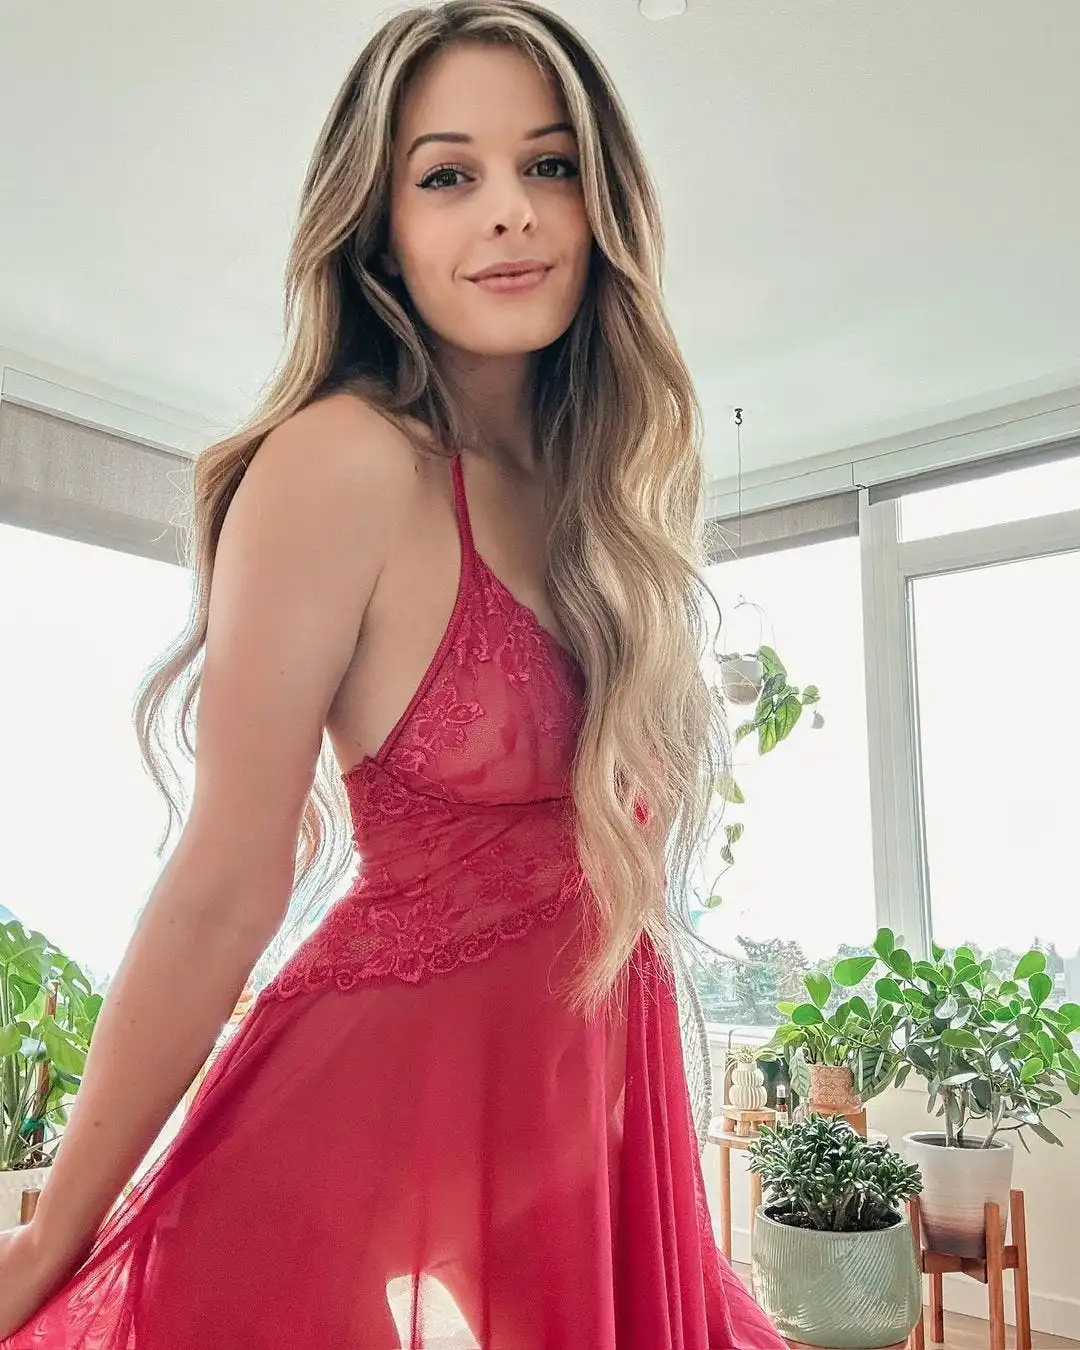 Who Is Bri Blossom? Age, Bio, Career And More Of The OnlyFans Model